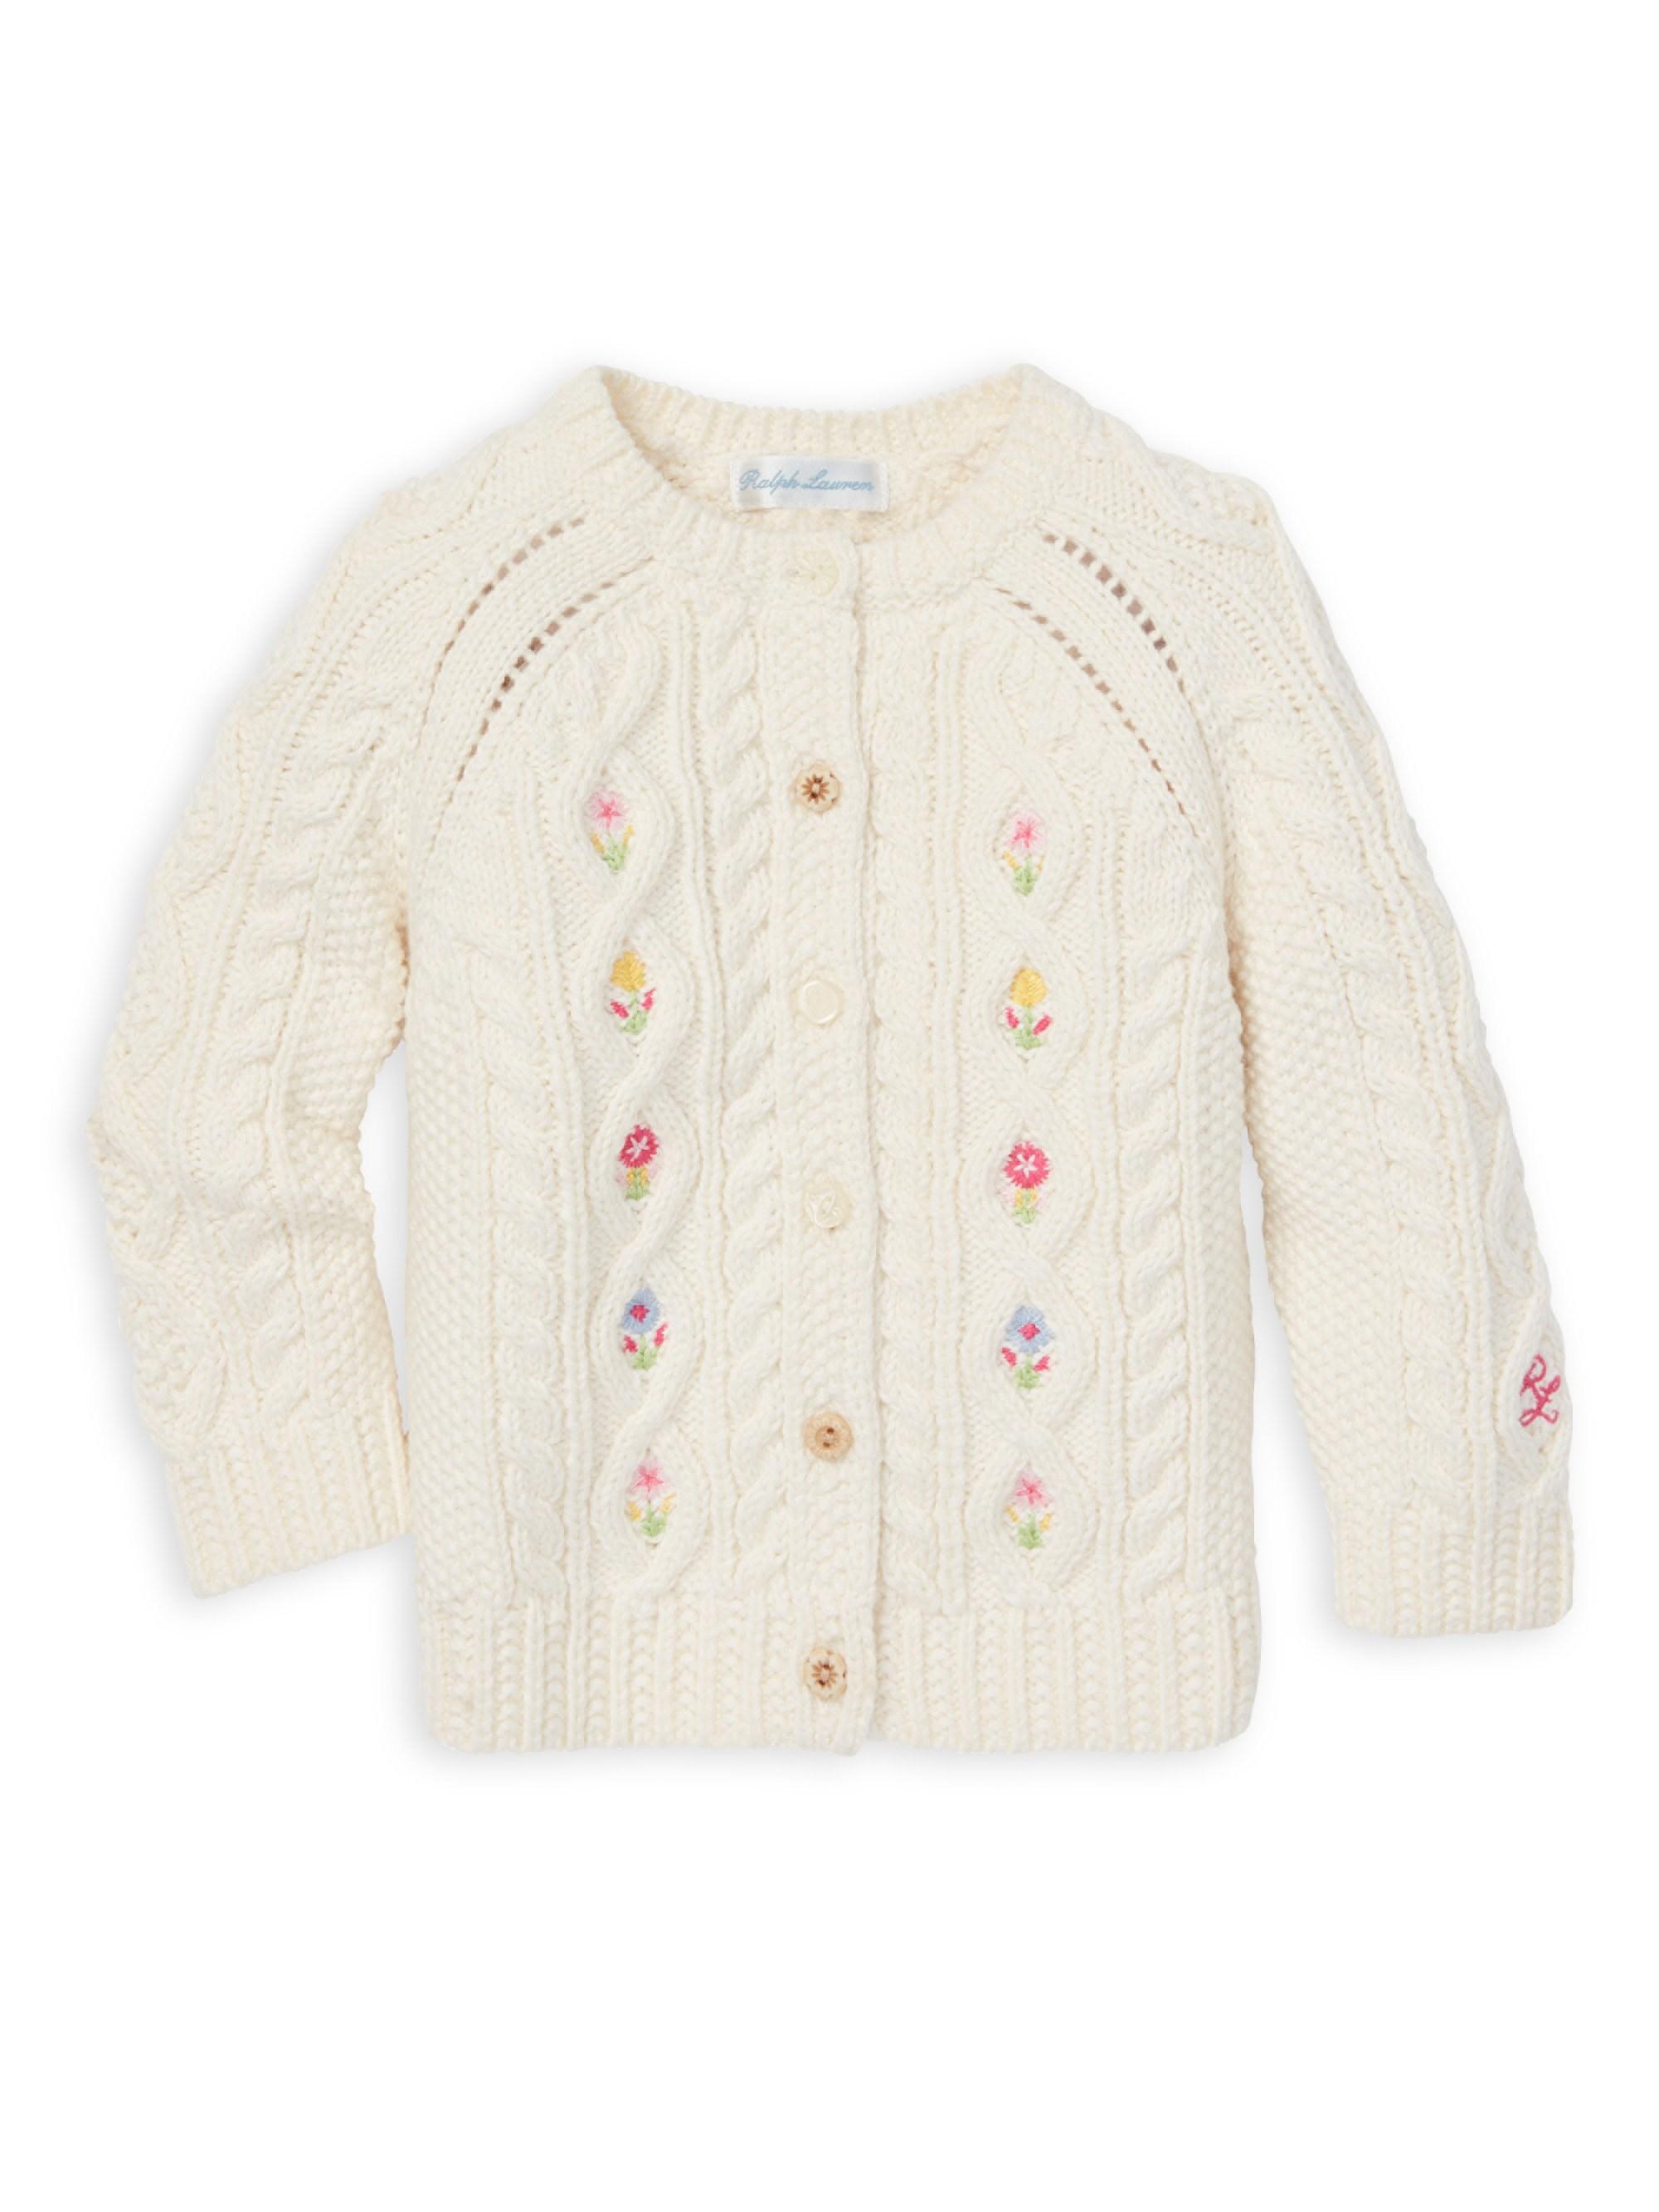 Ralph Lauren Baby Girl's Cable-knit Floral Cardigan in Natural - Lyst